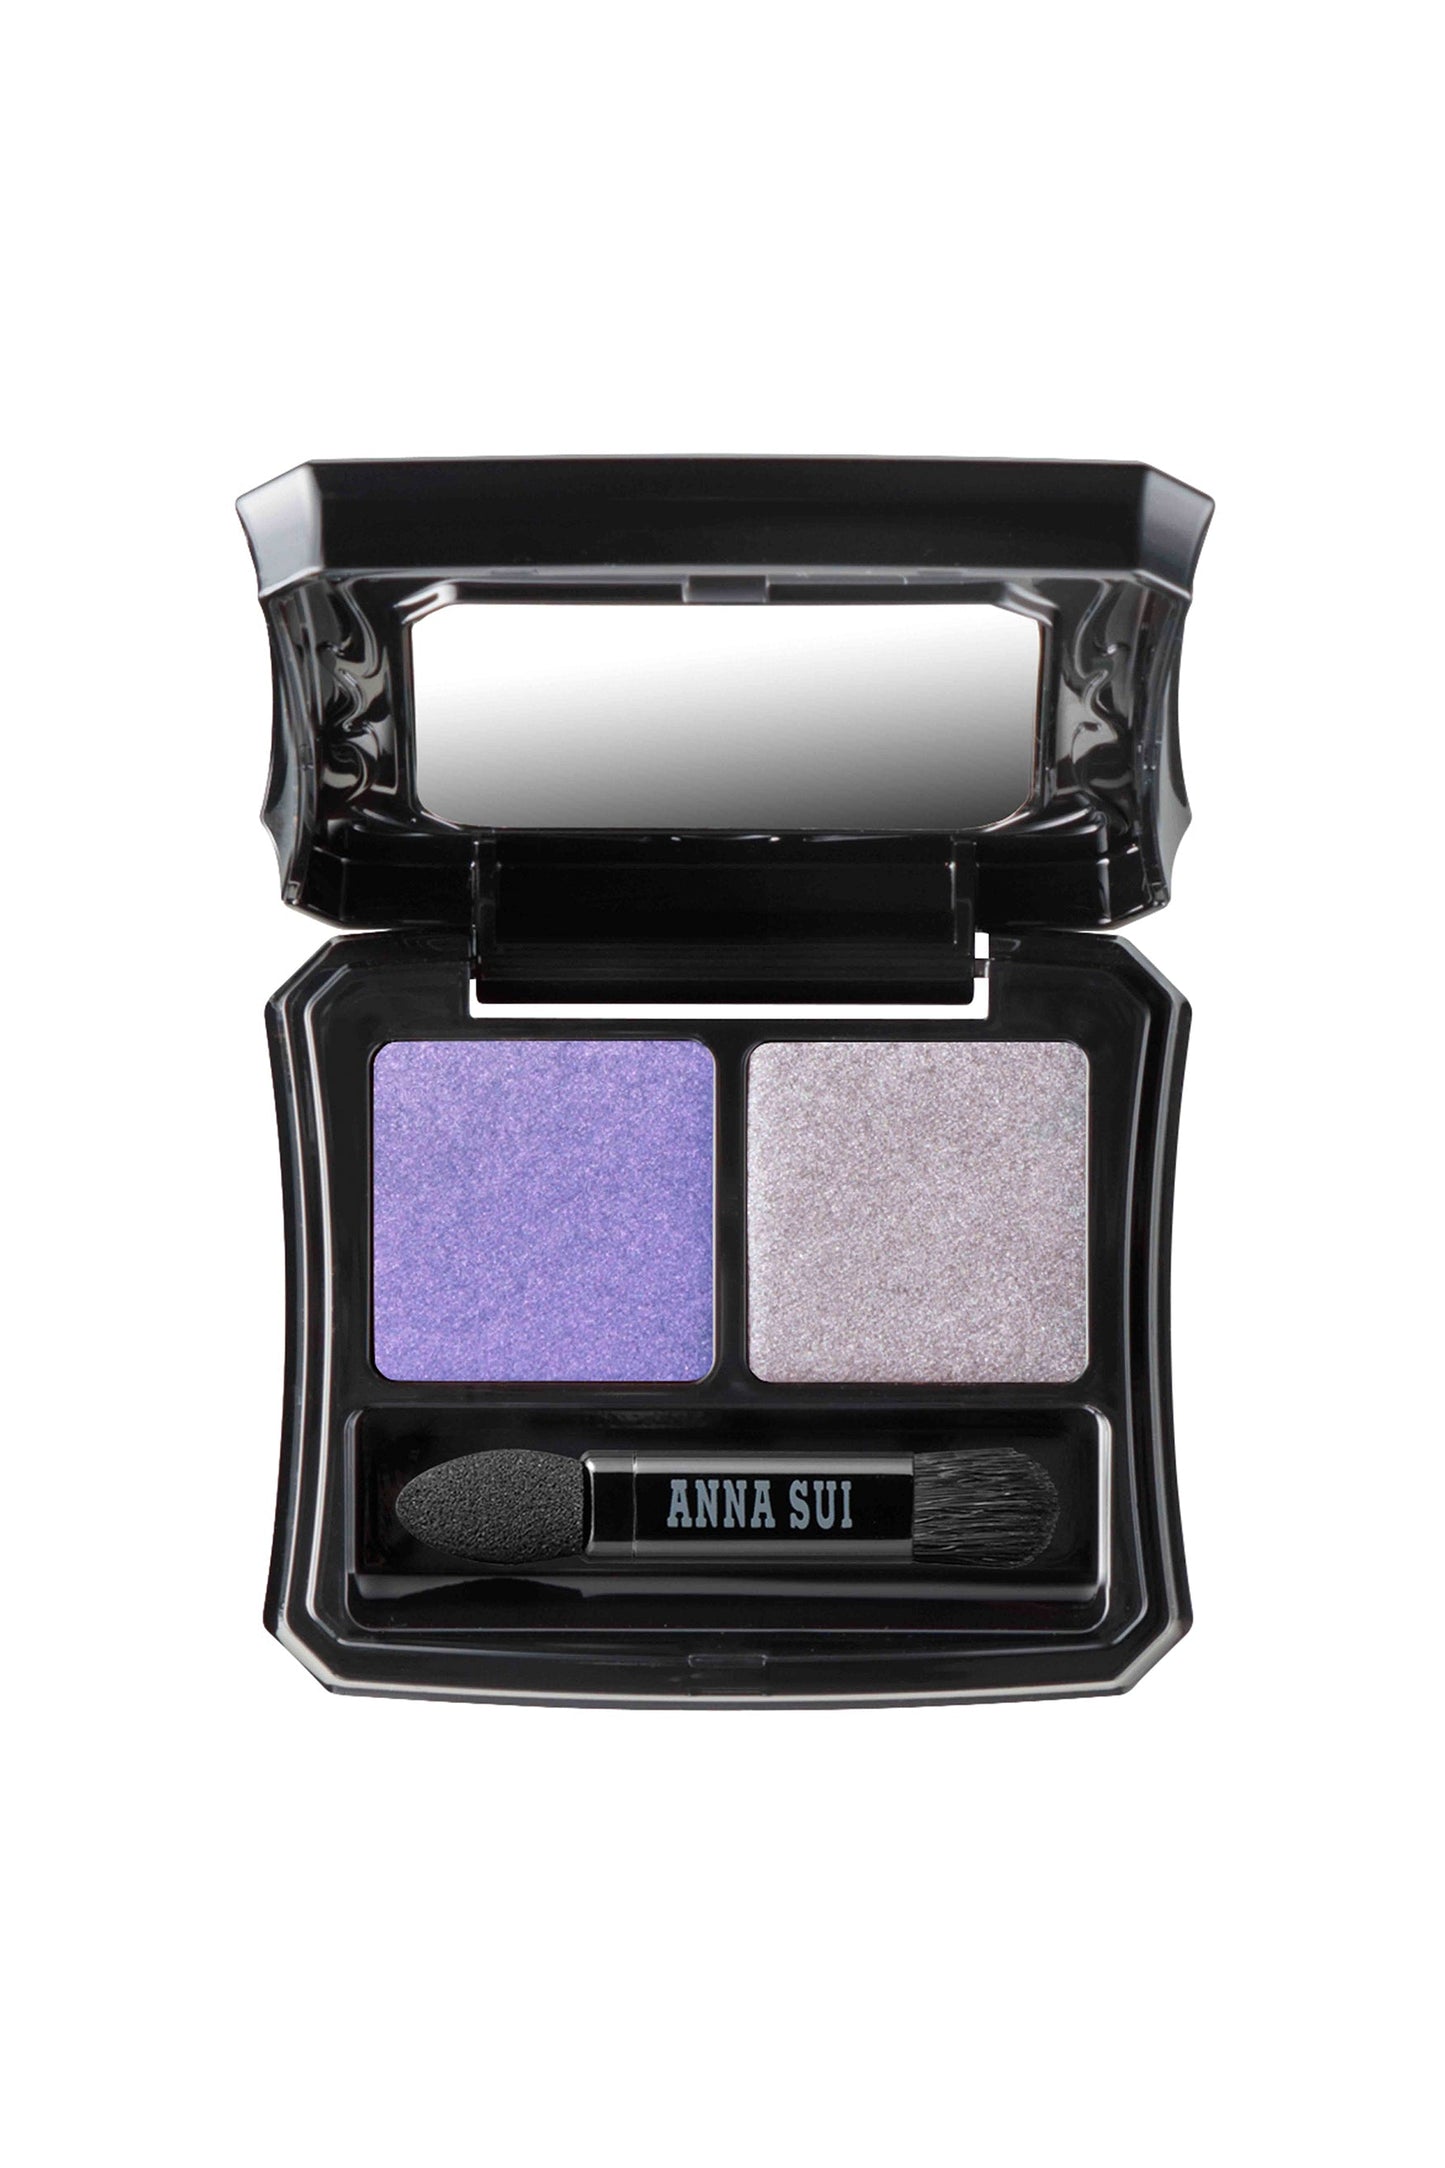 CLUB & NYC  in a square container with curvy sides, with Anna Sui applicator & mirror